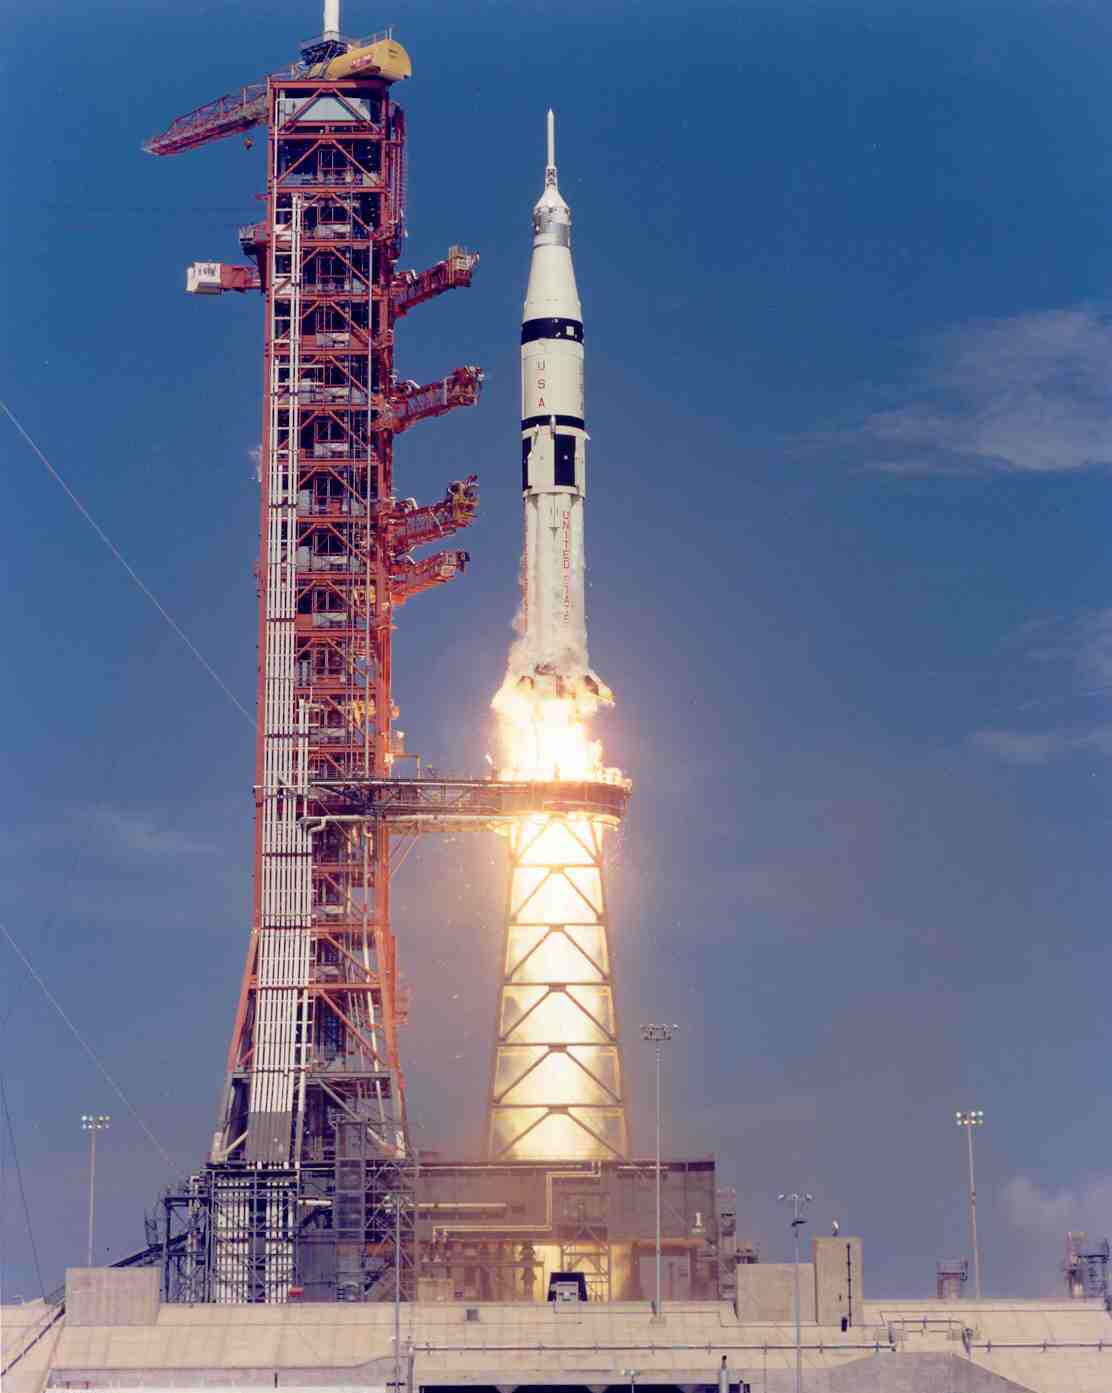 The Apollo-Soyuz Test Project Saturn 1B launch vehicle thundered away from Kennedy Space Center’s Launch Complex 39B